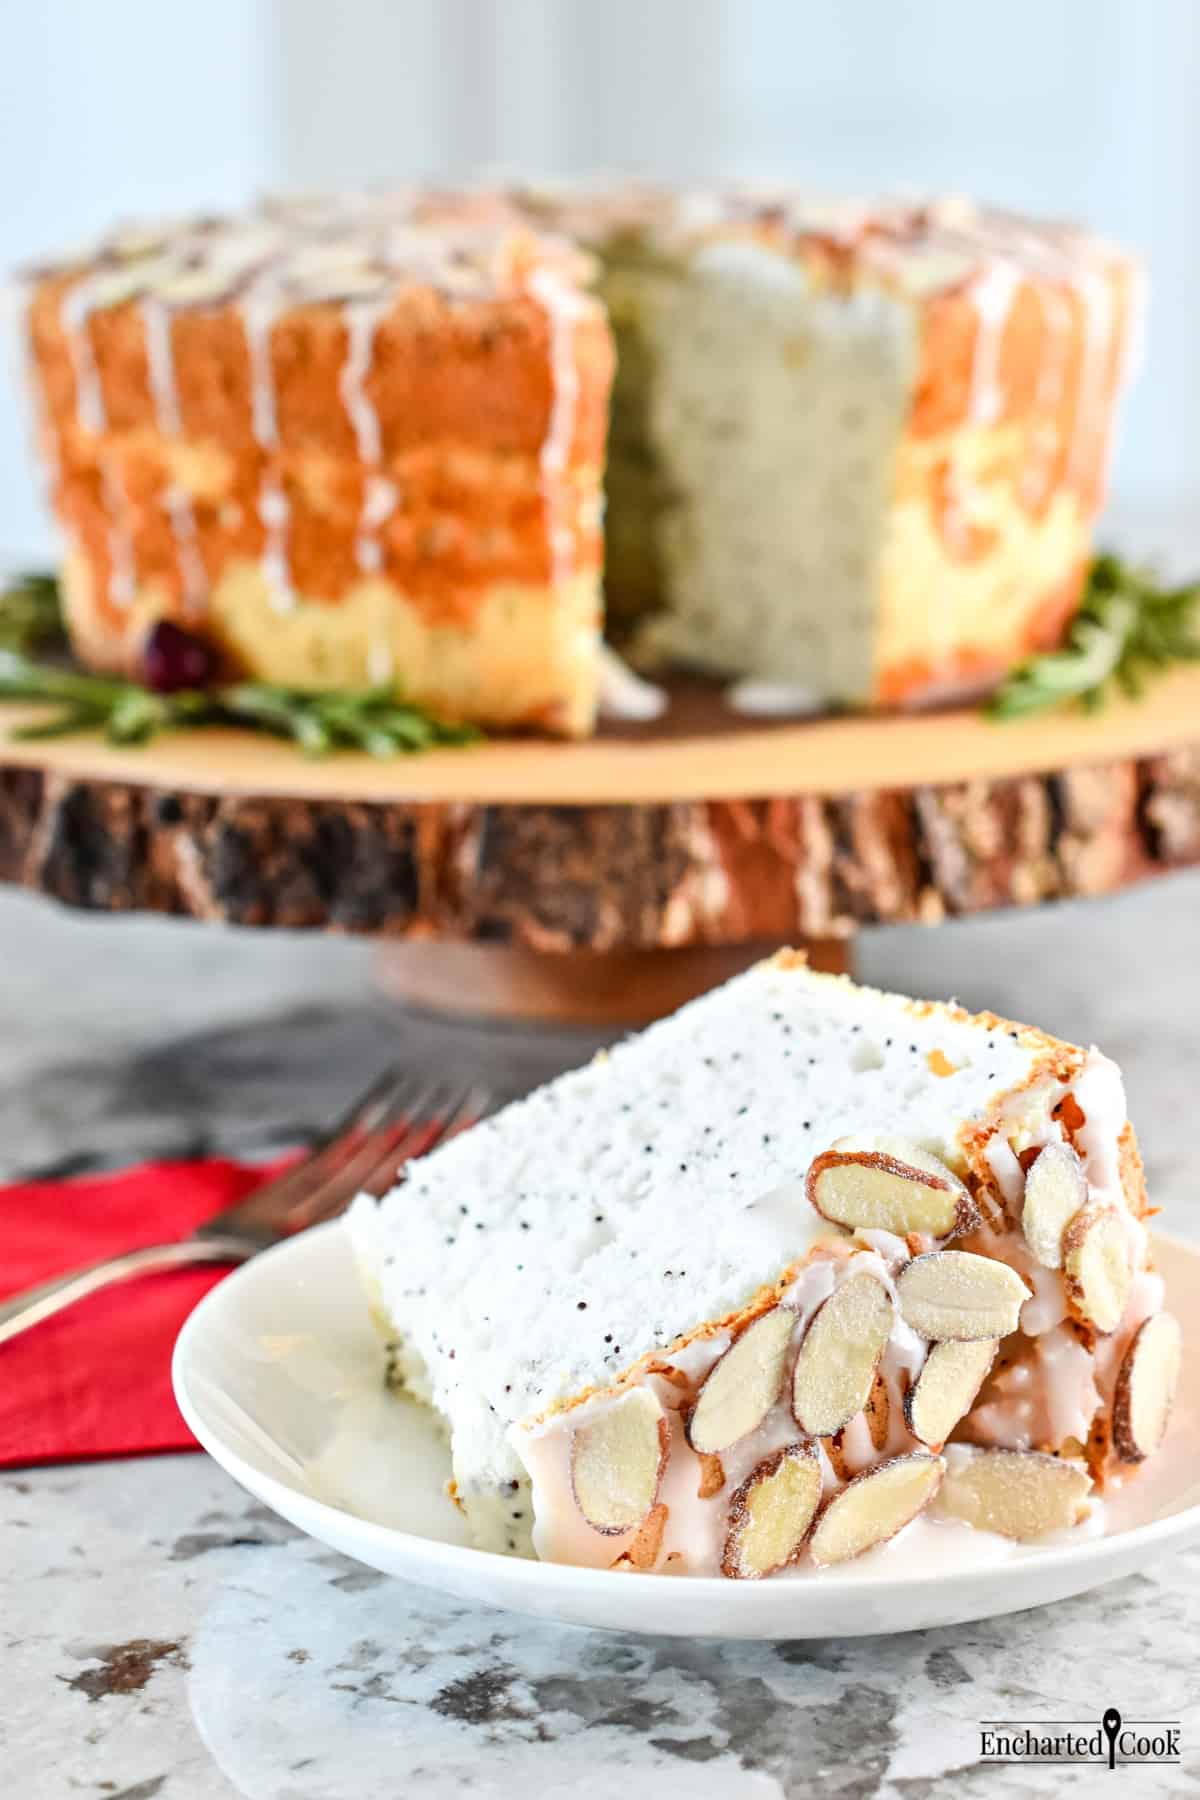 A slice of angel food cake with a snowy white glaze and pearl frosted almonds with the cut cake in the background.